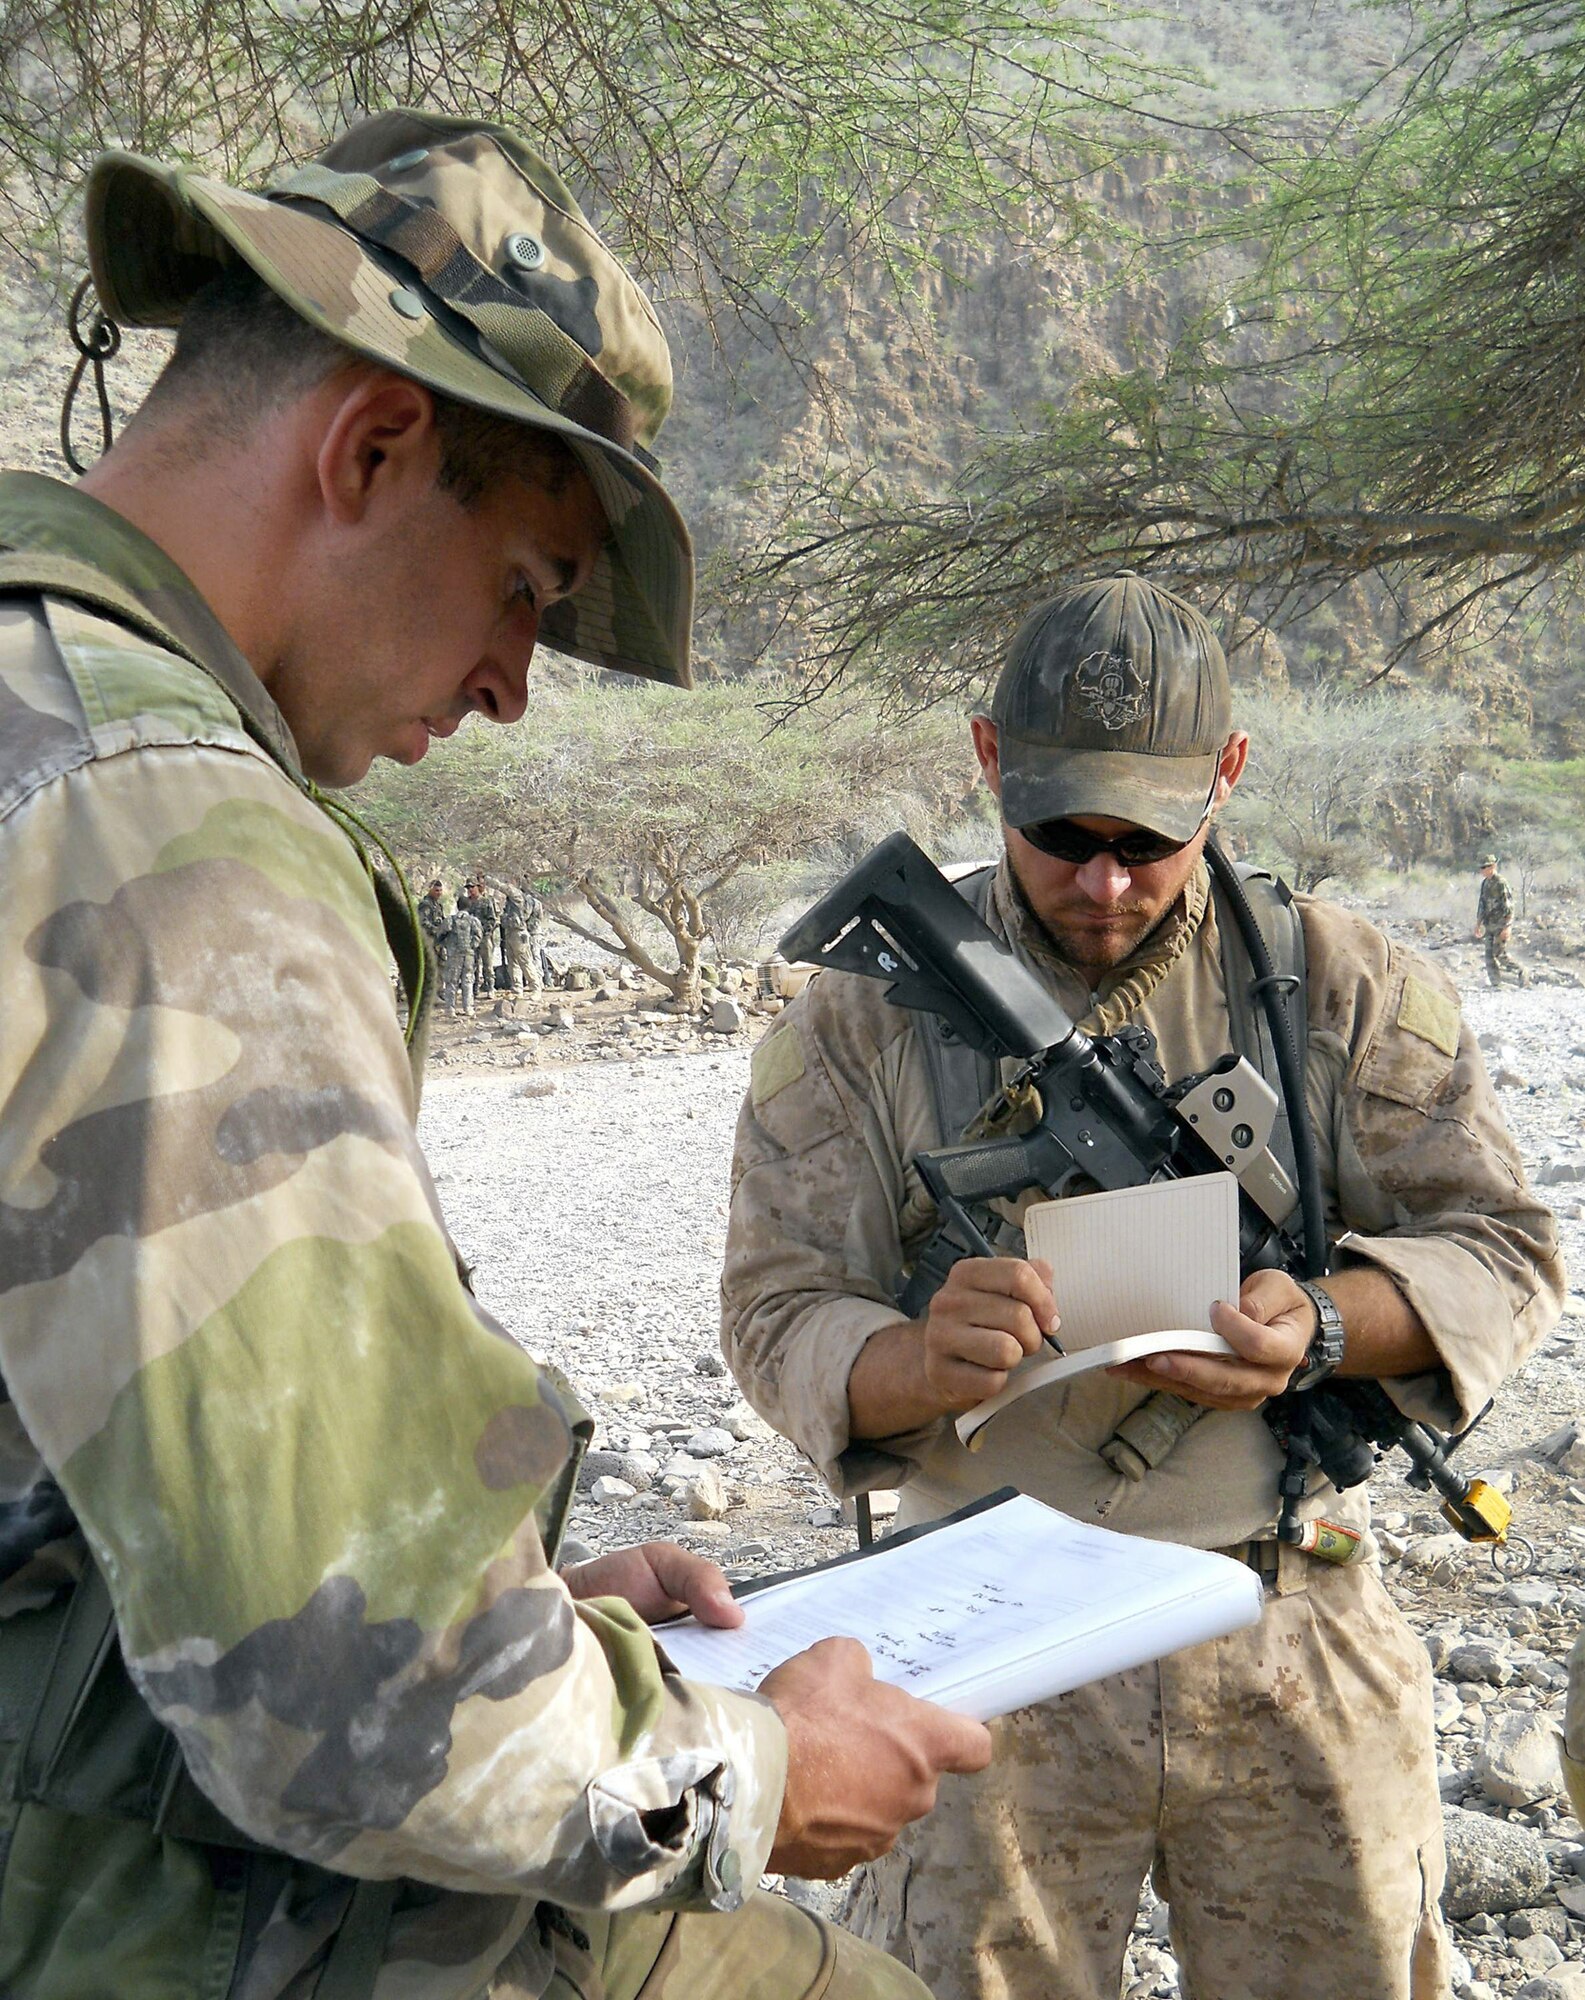 A member of the 5th French Marine Regiment translates a page of desert combat training instructions for U.S. Navy Petty Officer 3rd Class Ryan Donofrio (right) during a course which began May 31, 2011, in the Bour Ougoul training area in Djibouti. The 10-day course provided nearly 120 French and 40 U.S. service members with a basic knowledge of field tactics and survival techniques to use in a desert environment. Petty Officer Donofrio is an explosive ordnance disposal technician with Combined Joint Task Force - Horn of Africa. (U.S. Air Force photo/Staff Sgt. R.J. Biermann)